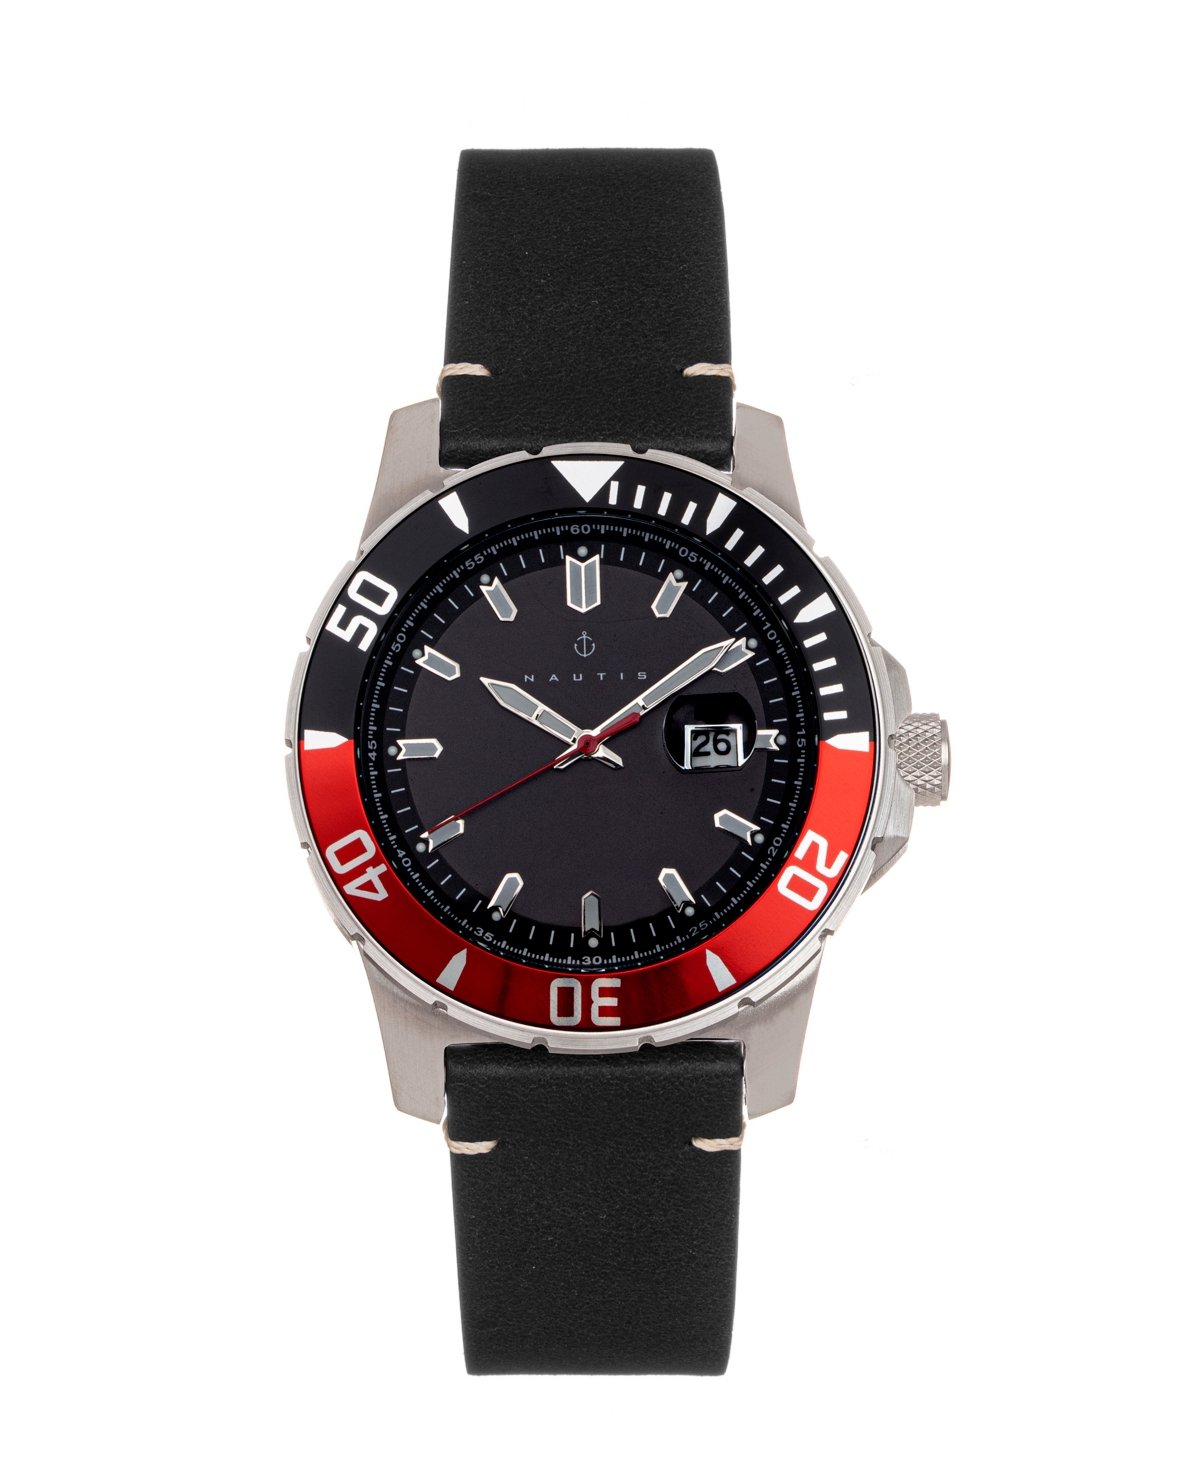 Dive Pro 200 Black or Brown Genuine Leather Band Watch, 51mm - Black, Red